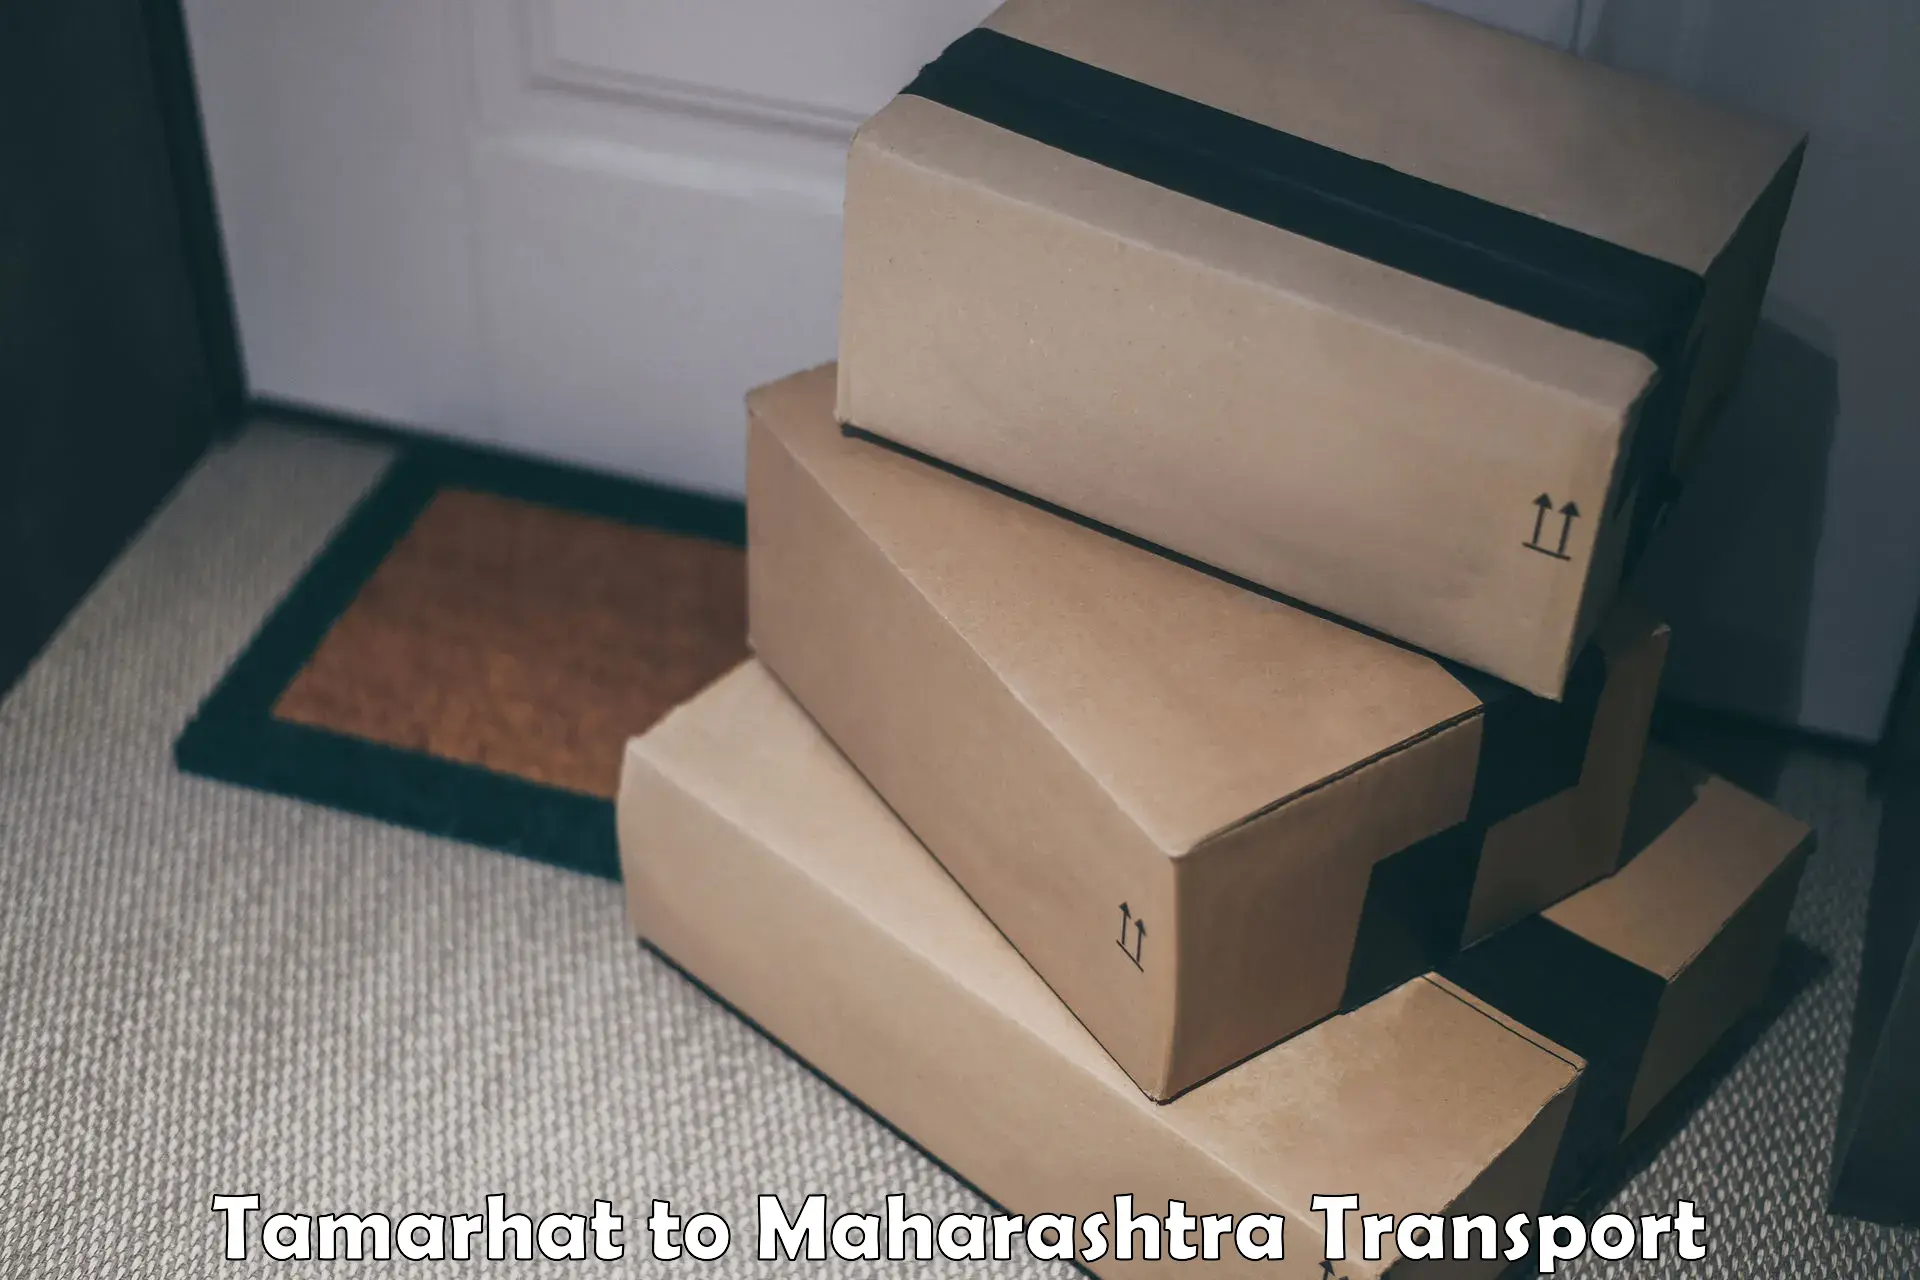 Vehicle courier services Tamarhat to Ahmednagar